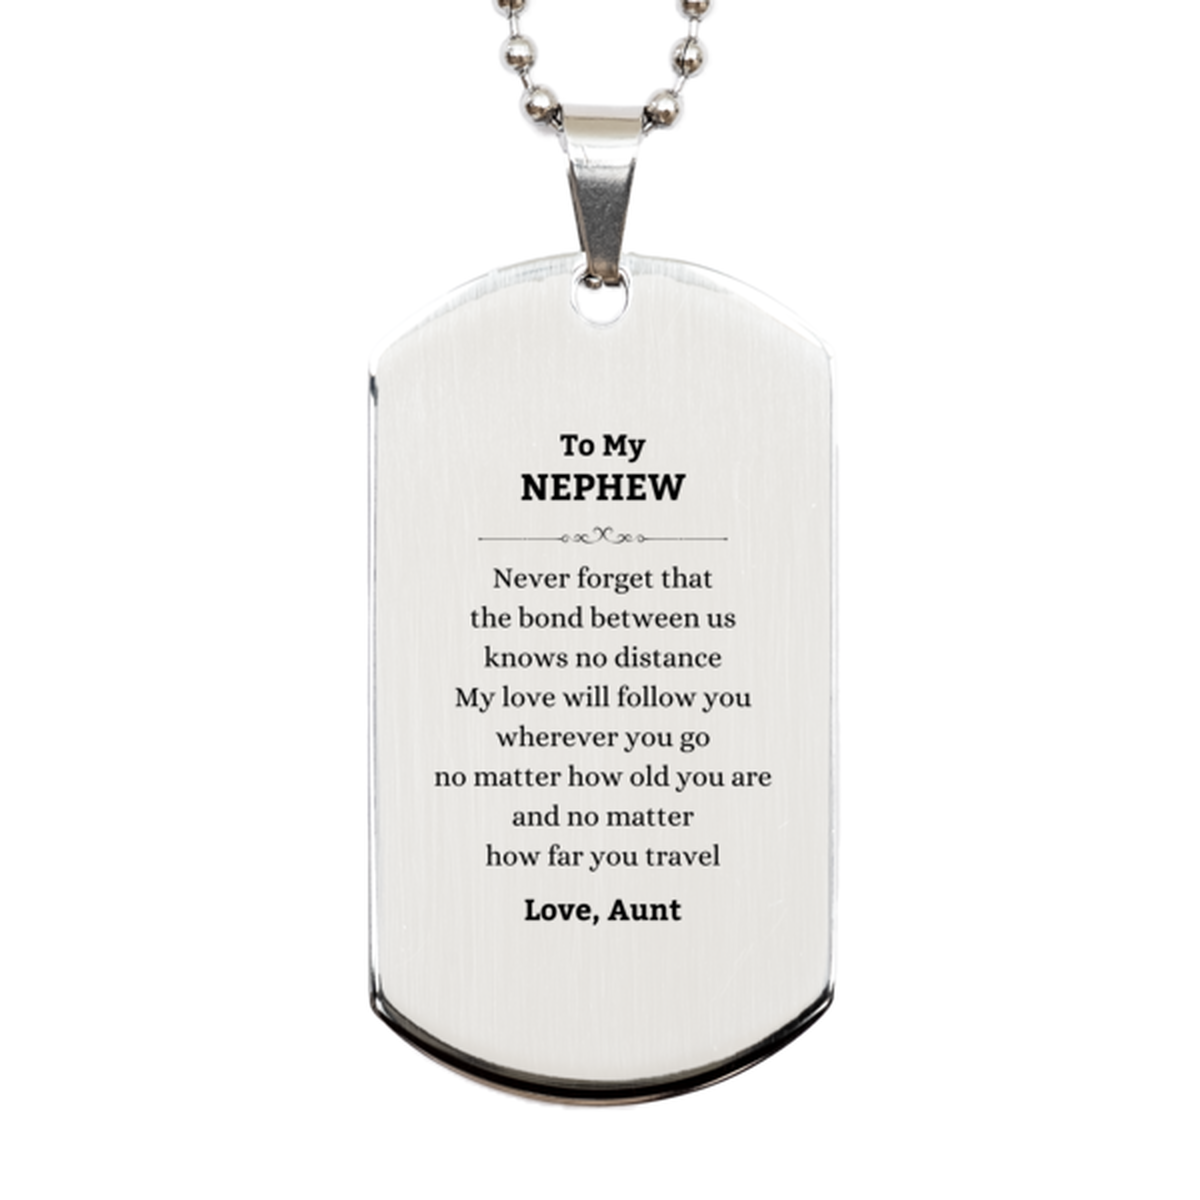 Nephew Birthday Gifts from Aunt, Adjustable Silver Dog Tag for Nephew Christmas Graduation Unique Gifts Nephew Never forget that the bond between us knows no distance. Love, Aunt